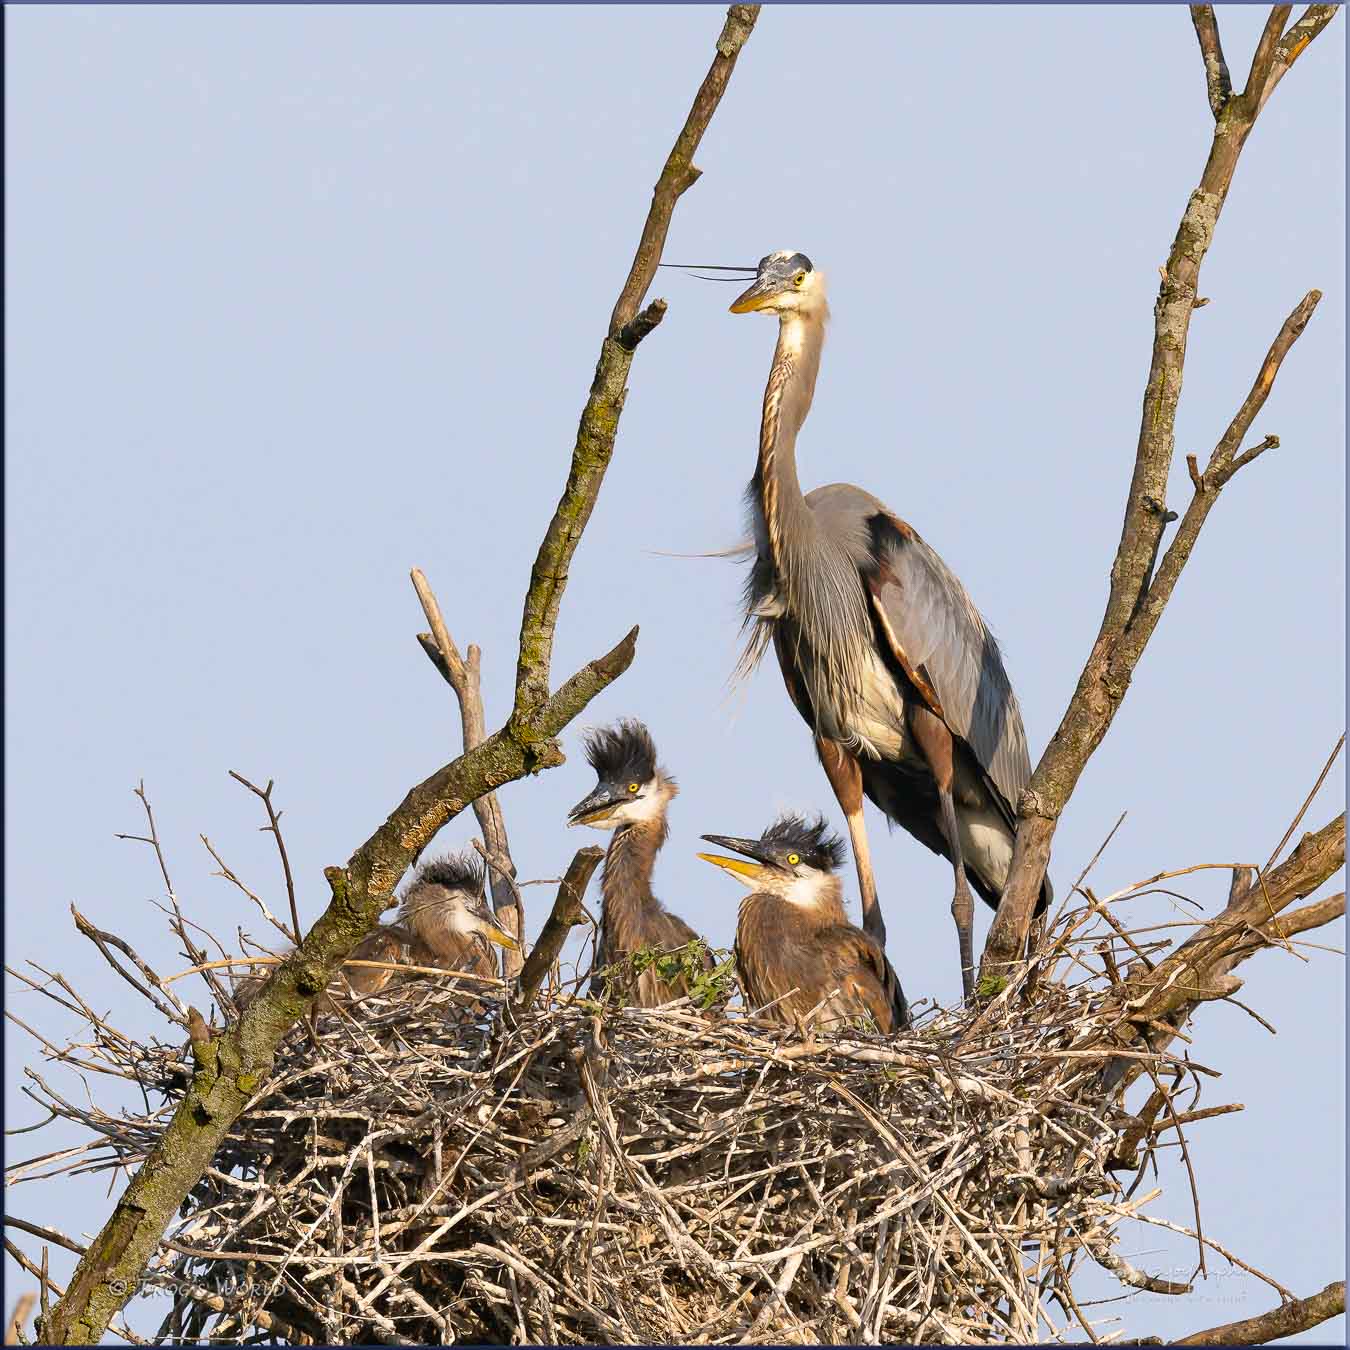 Great Blue Heron family in the nest